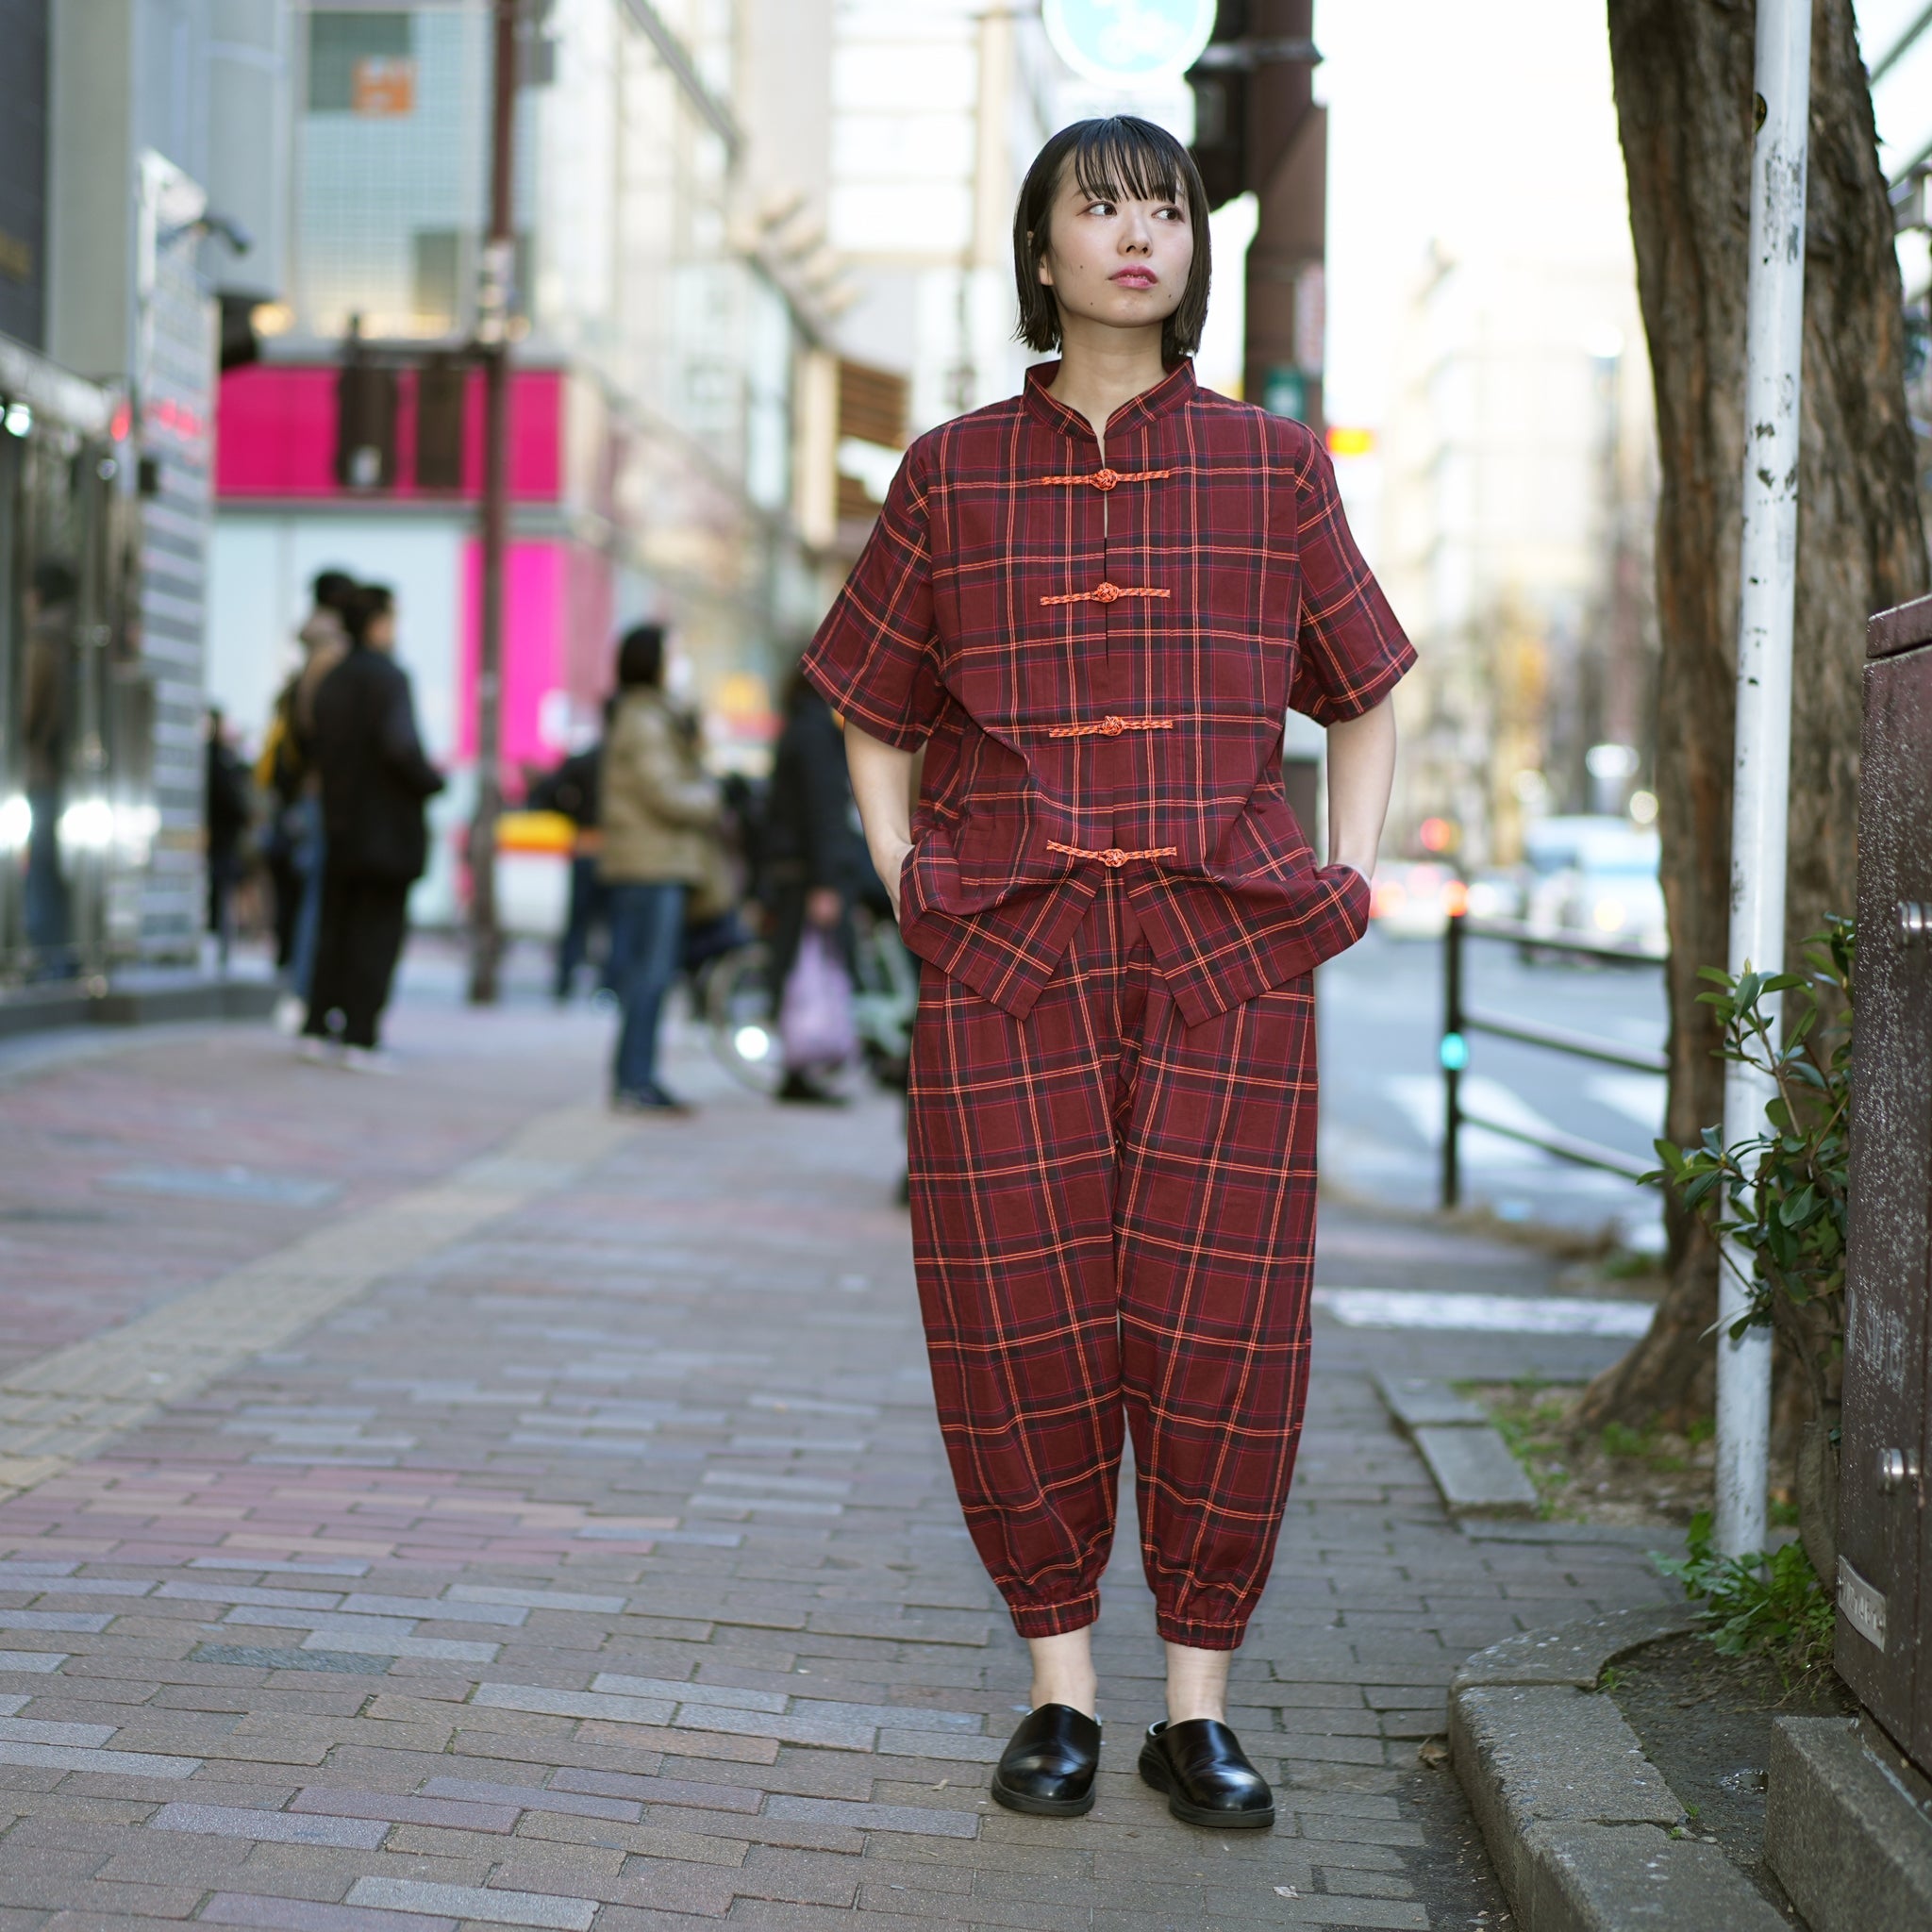 No:bsd23SS-10_a | Name:Checked sarrouel pants | Color:Red【BEDSIDEDRAMA_ベッドサイドドラマ】